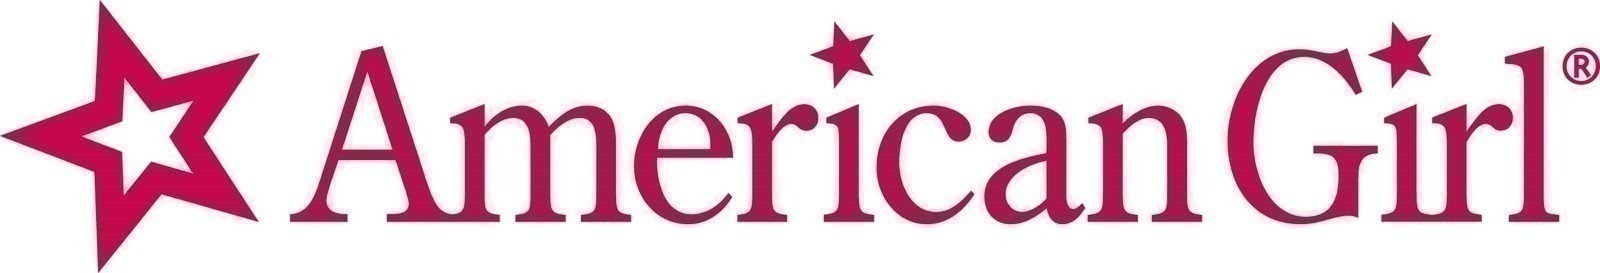 American Girl: FREE Shipping on $100 or more + 20% OFF Full Price Merchandise